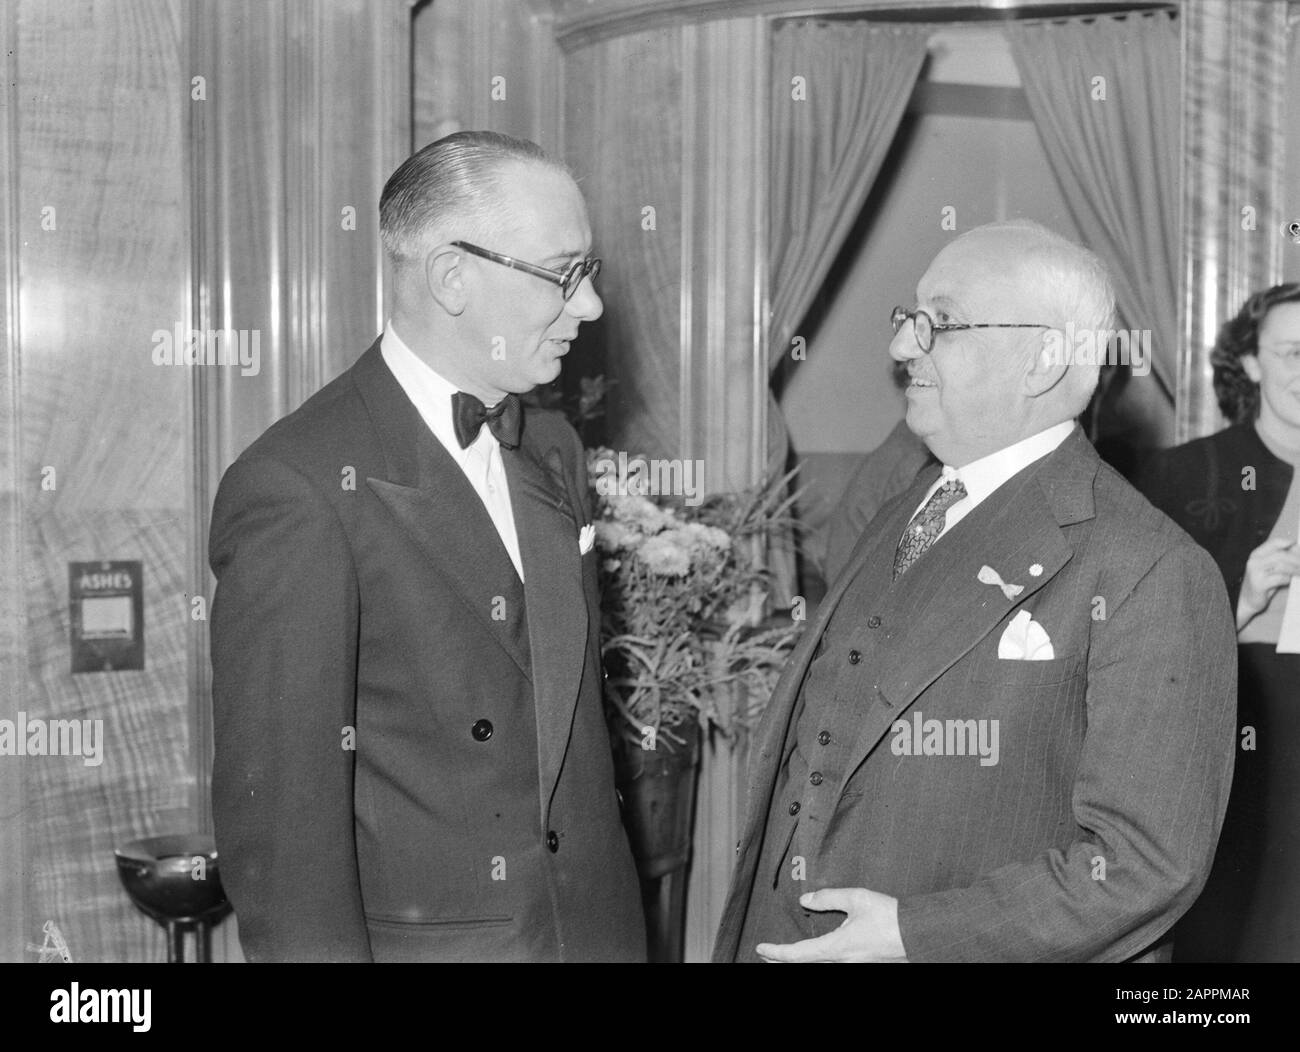 HIE [Holland in England]/Anefo London series  Odeon Cinema in London. Premiere of the film Glorious Colours. Visitors in conversation Date: 5 August 1943 Location: Great Britain, London Keywords: cinemas, movies, conversations, World War II Institution Name: Odeon Stock Photo